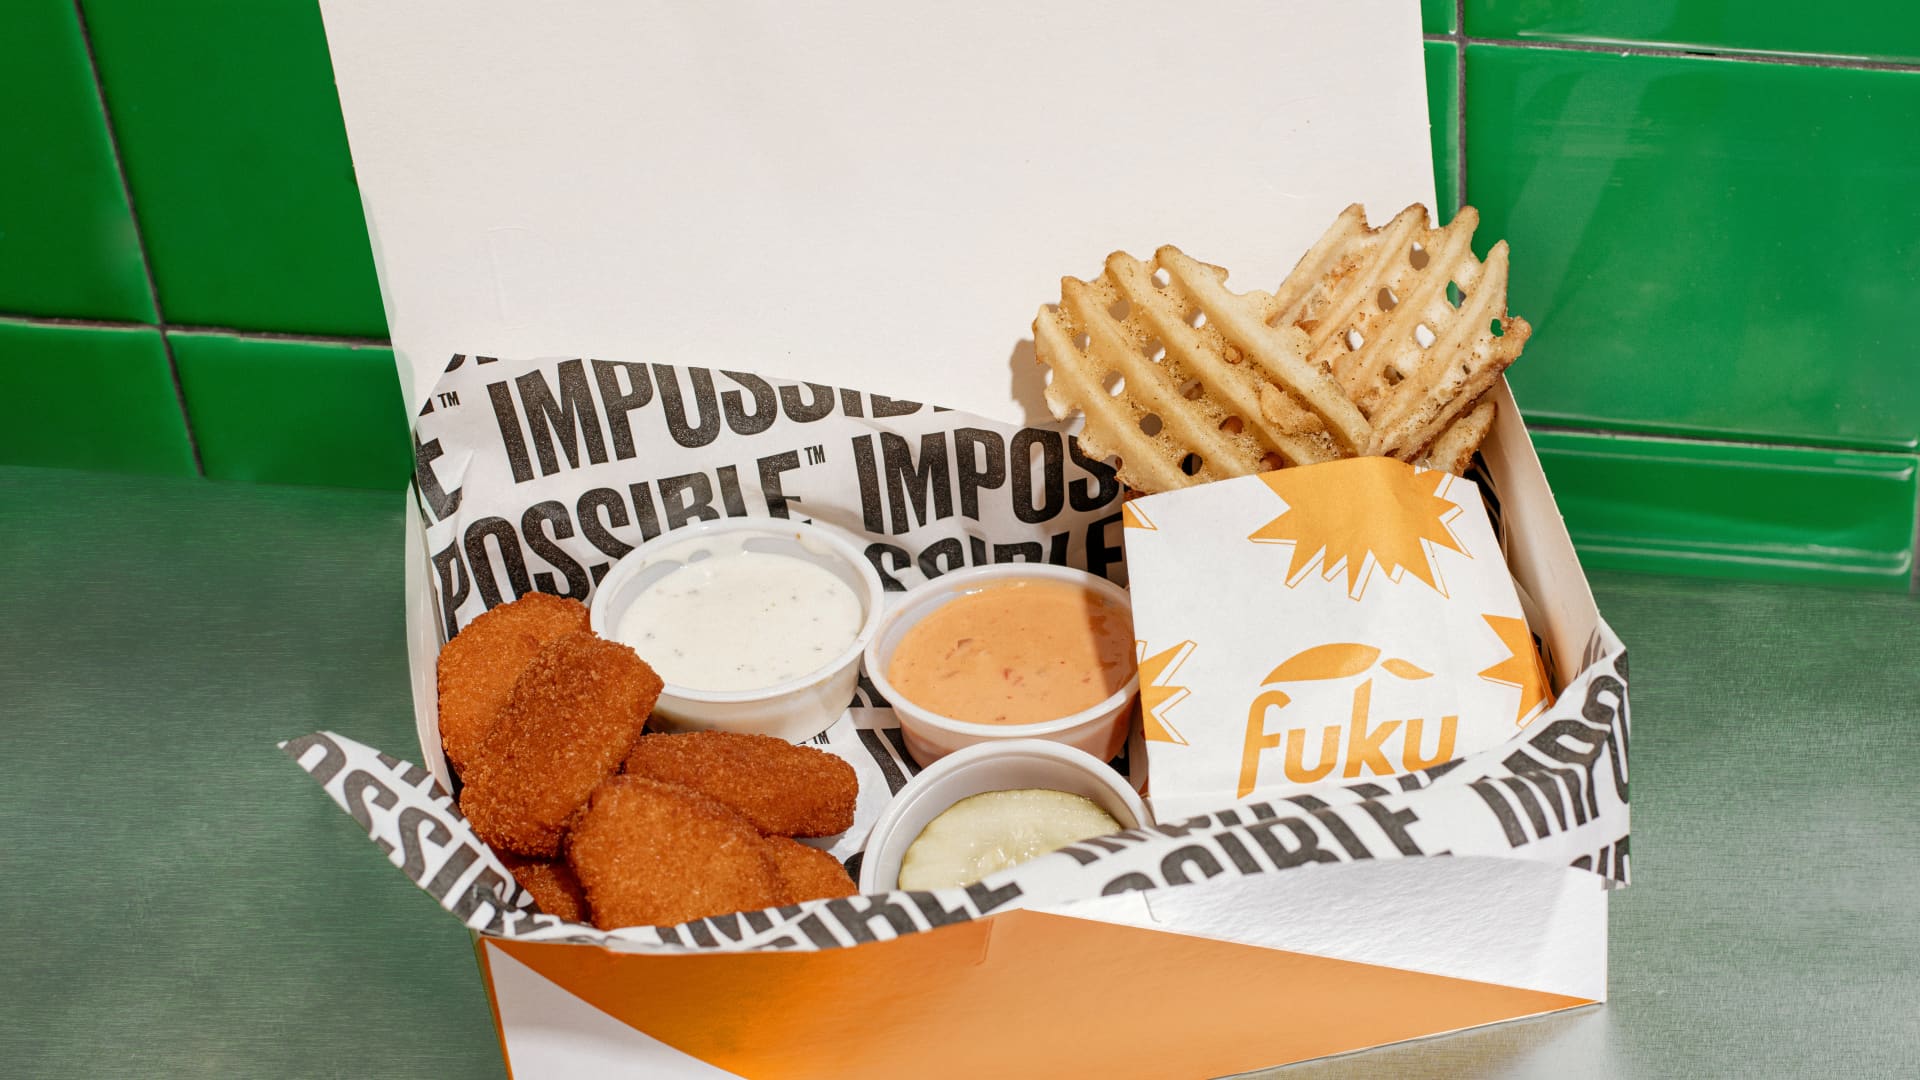 Impossible Foods' chicken substitute at Fuku